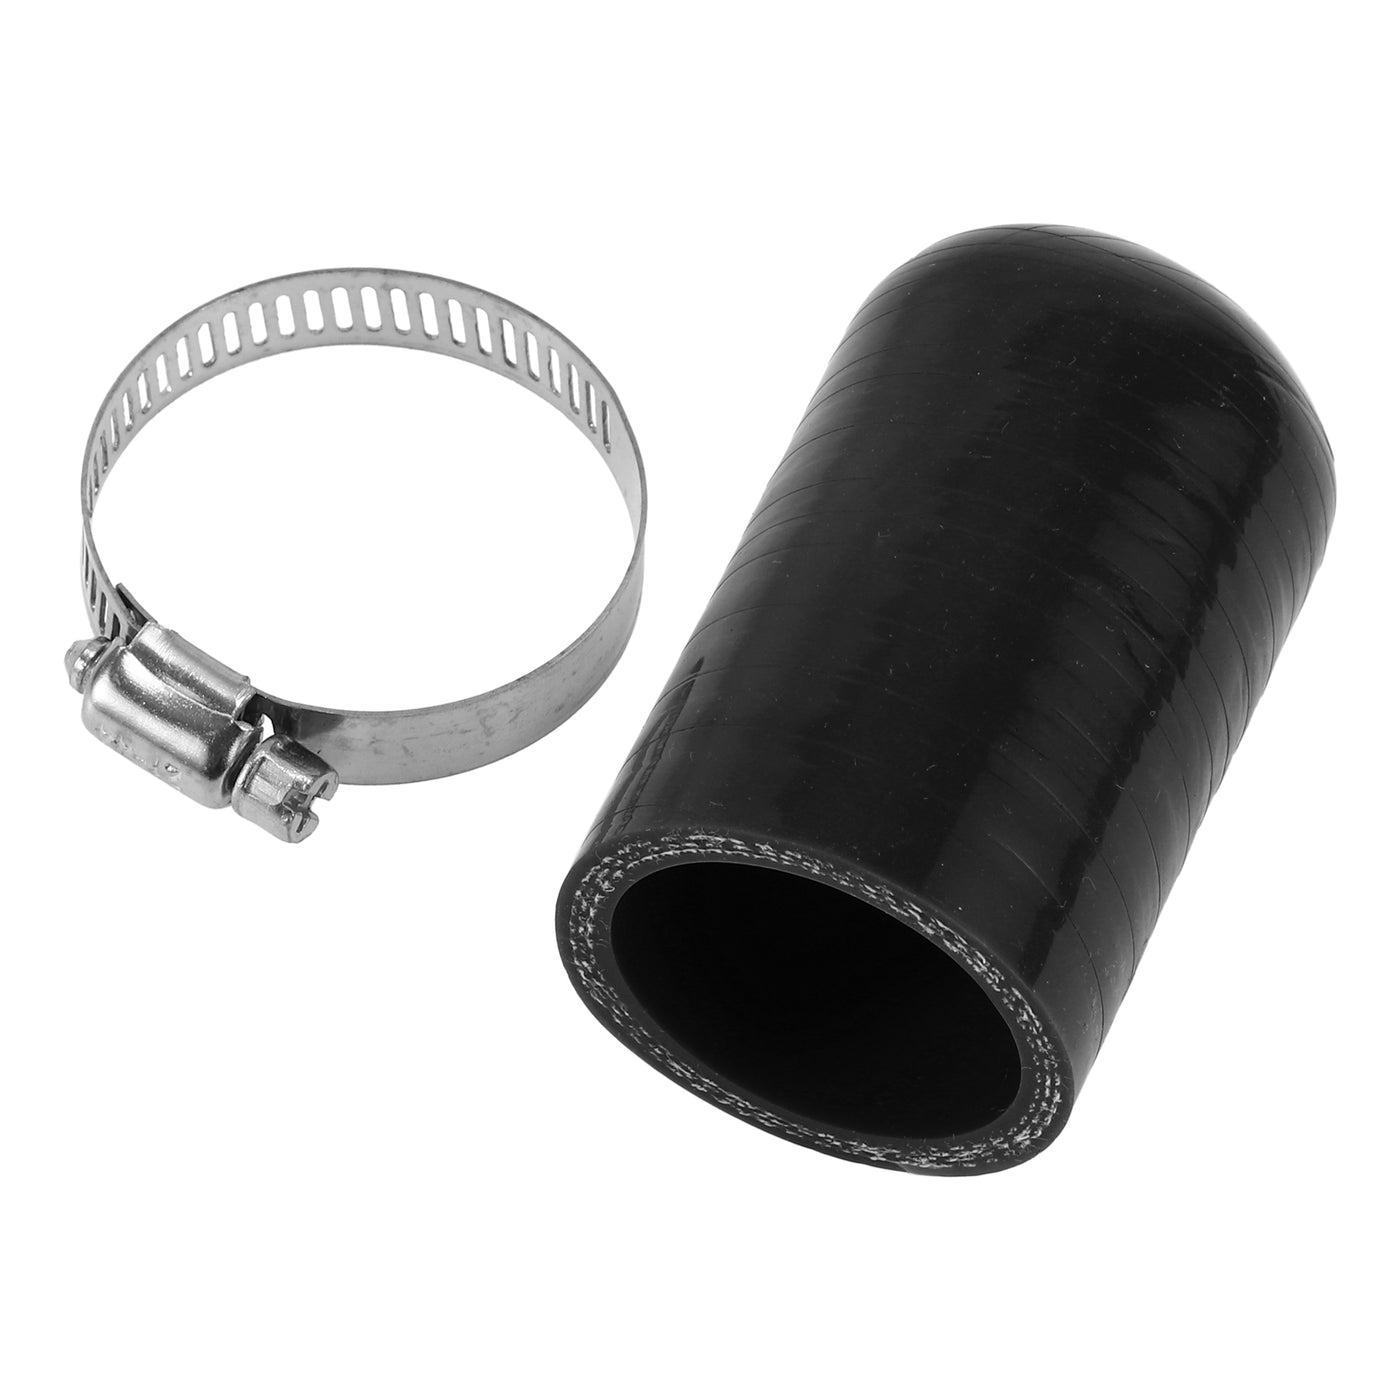 X AUTOHAUX 1 Pcs 60mm Length 35mm/1.38" ID Black Car Silicone Rubber Hose End Cap with Clamp Silicone Reinforced Blanking Cap for Bypass Tube Universal